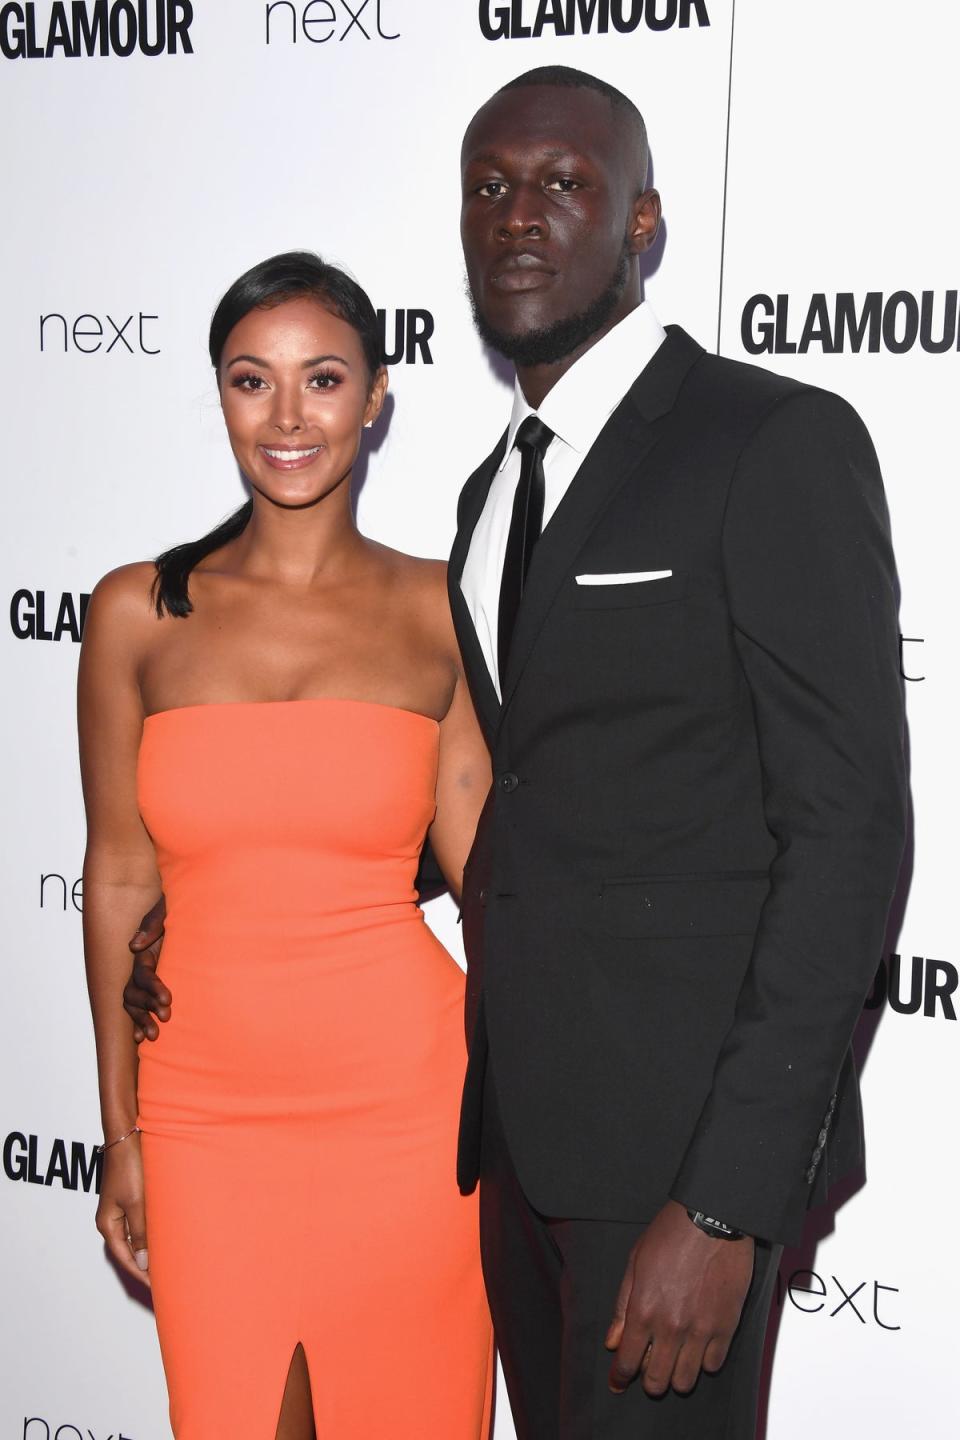 Maya Jama and Stormzy attend the Glamour Women of The Year awards together in 2017 (Getty Images)